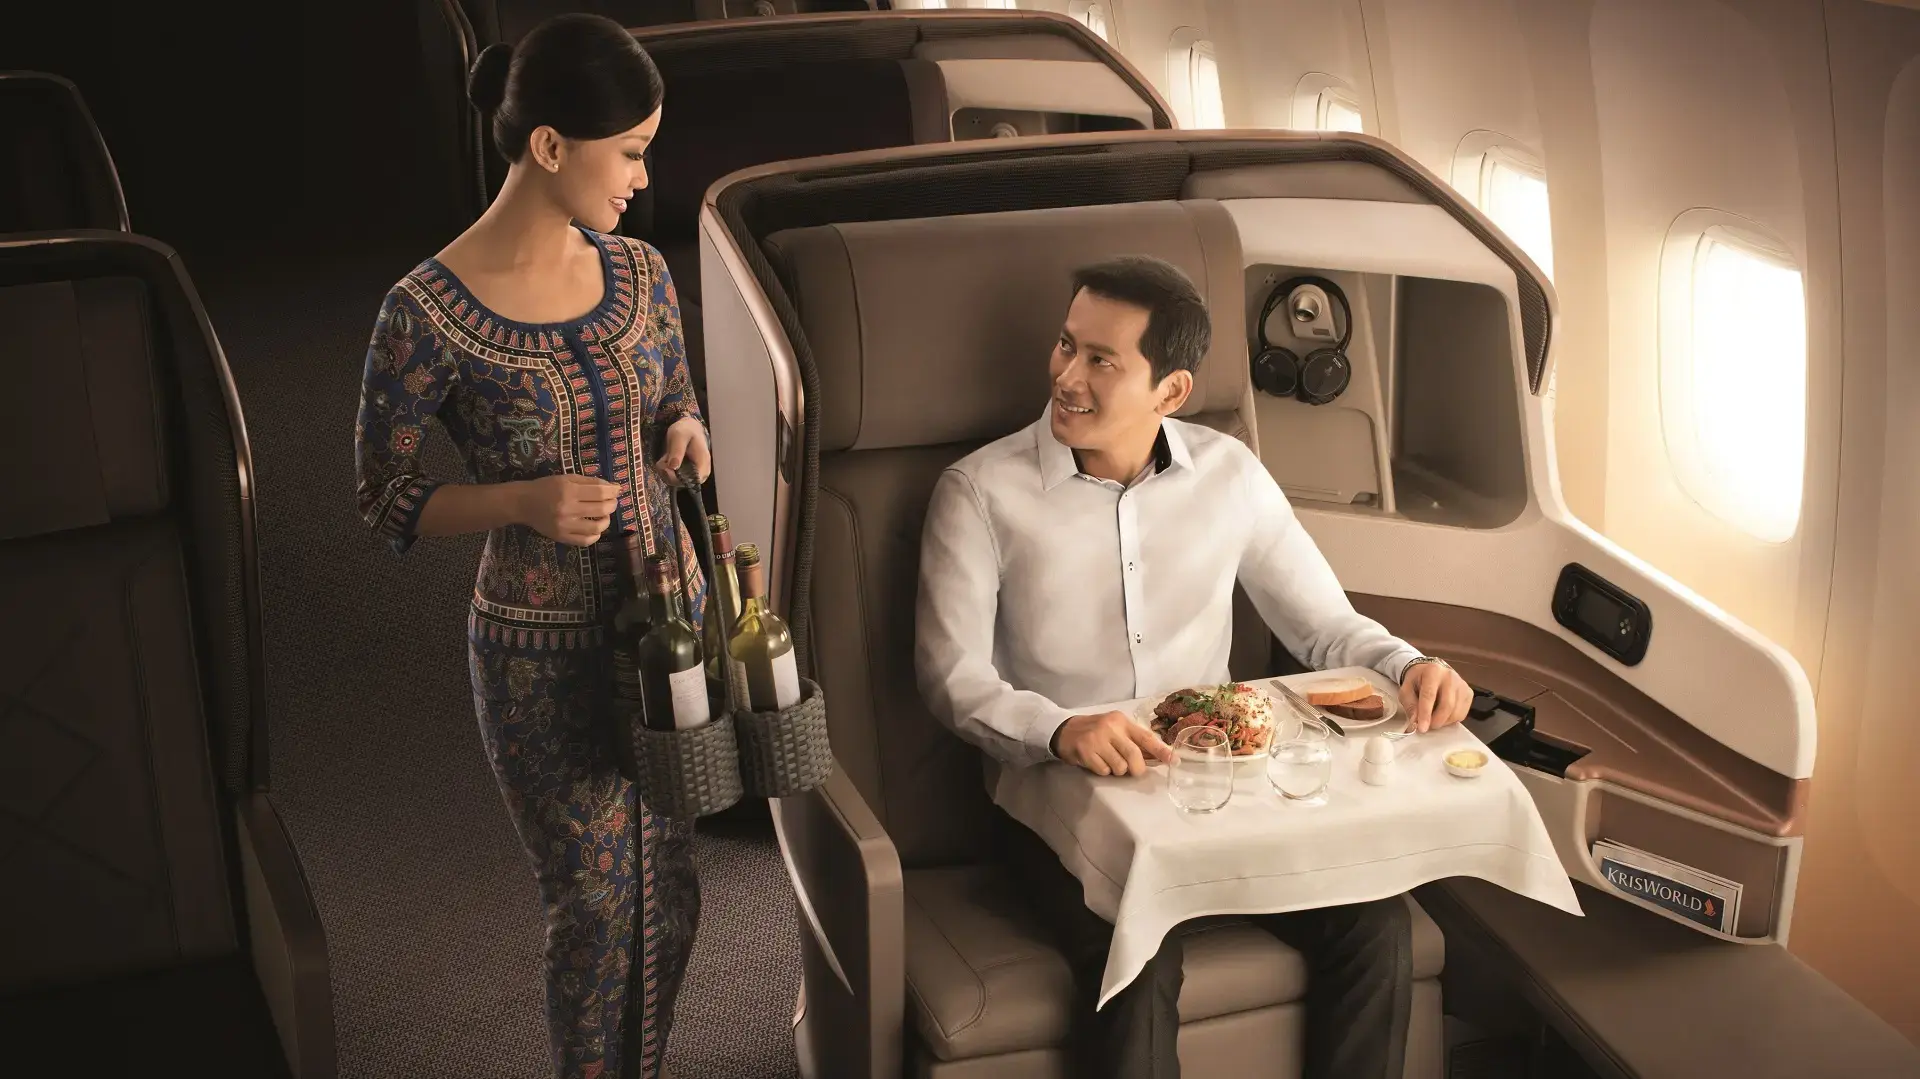 a passenger getting served in the Singapore Airlines business class by an air hostess